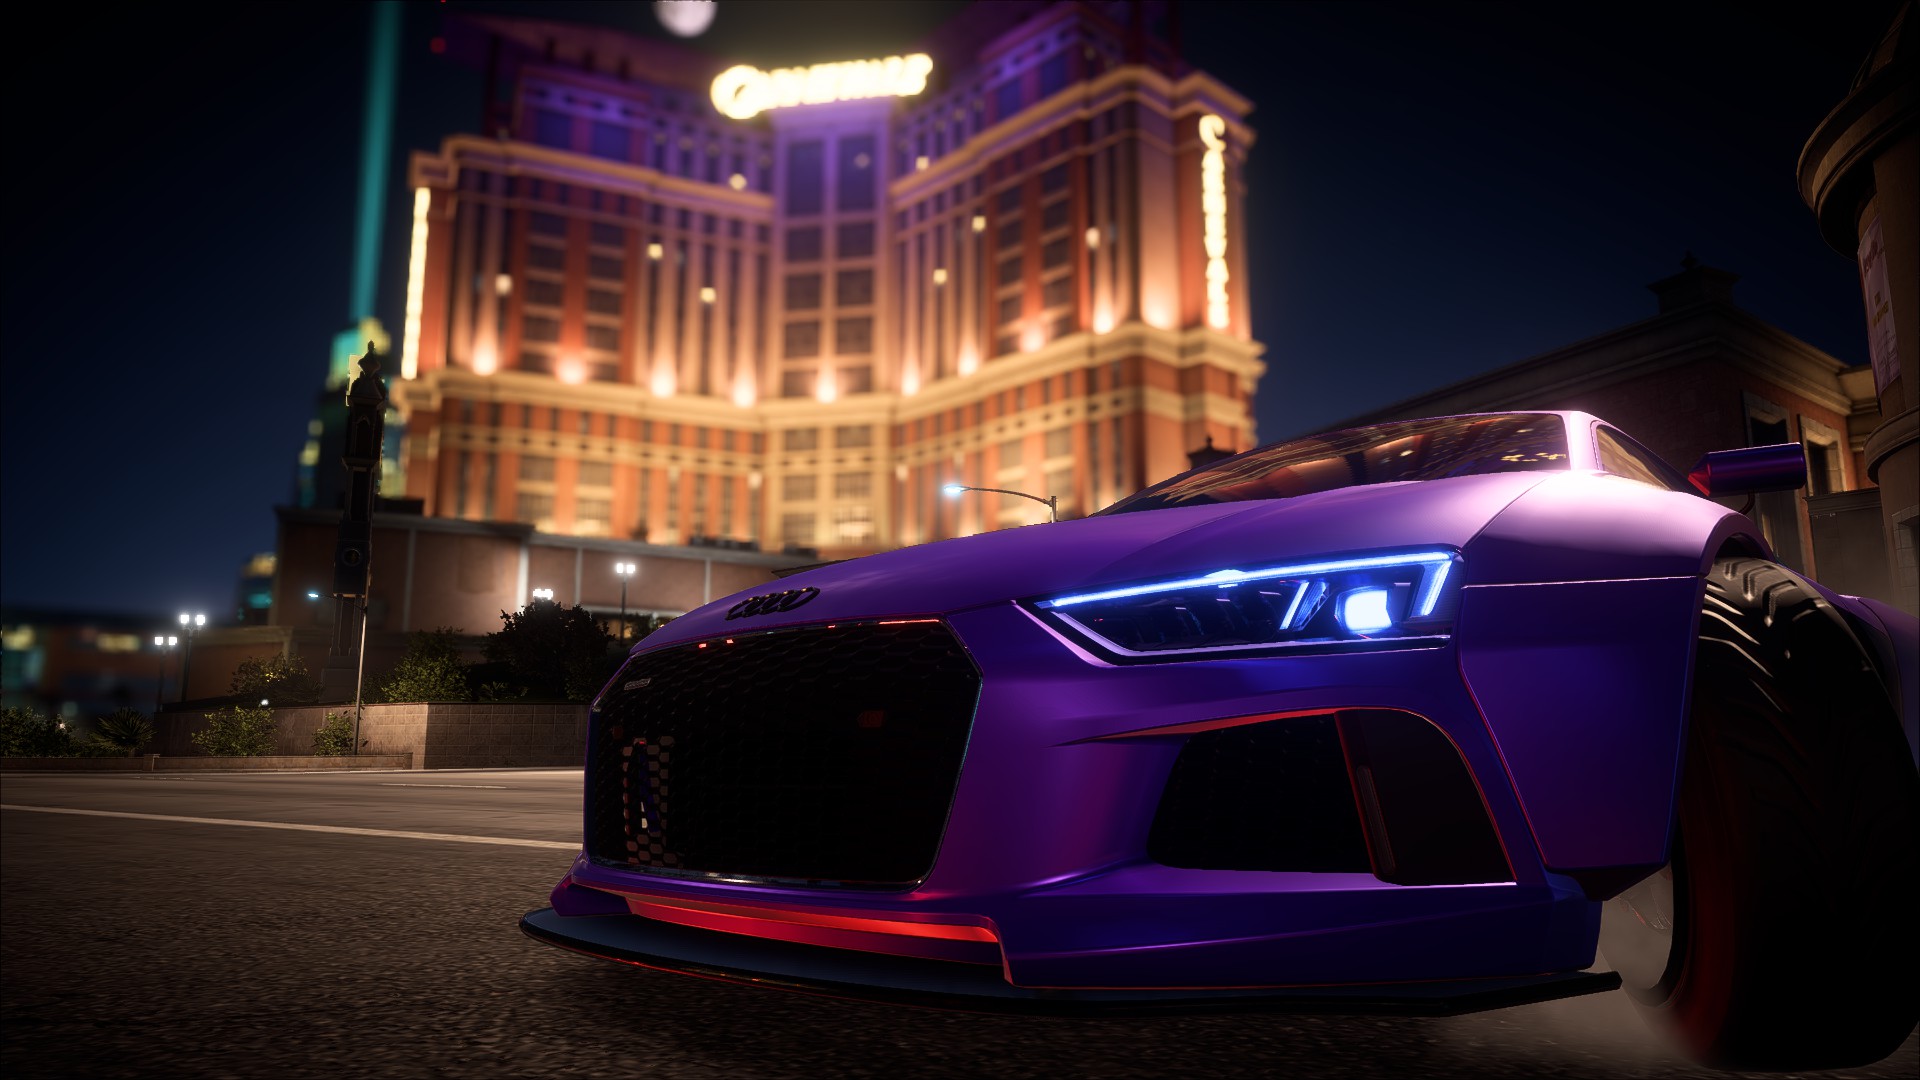 Car Need For Speed Need For Speed Payback Audi R8 Sports Car Audi Video Game Art Screen Shot Audi R8 1920x1080